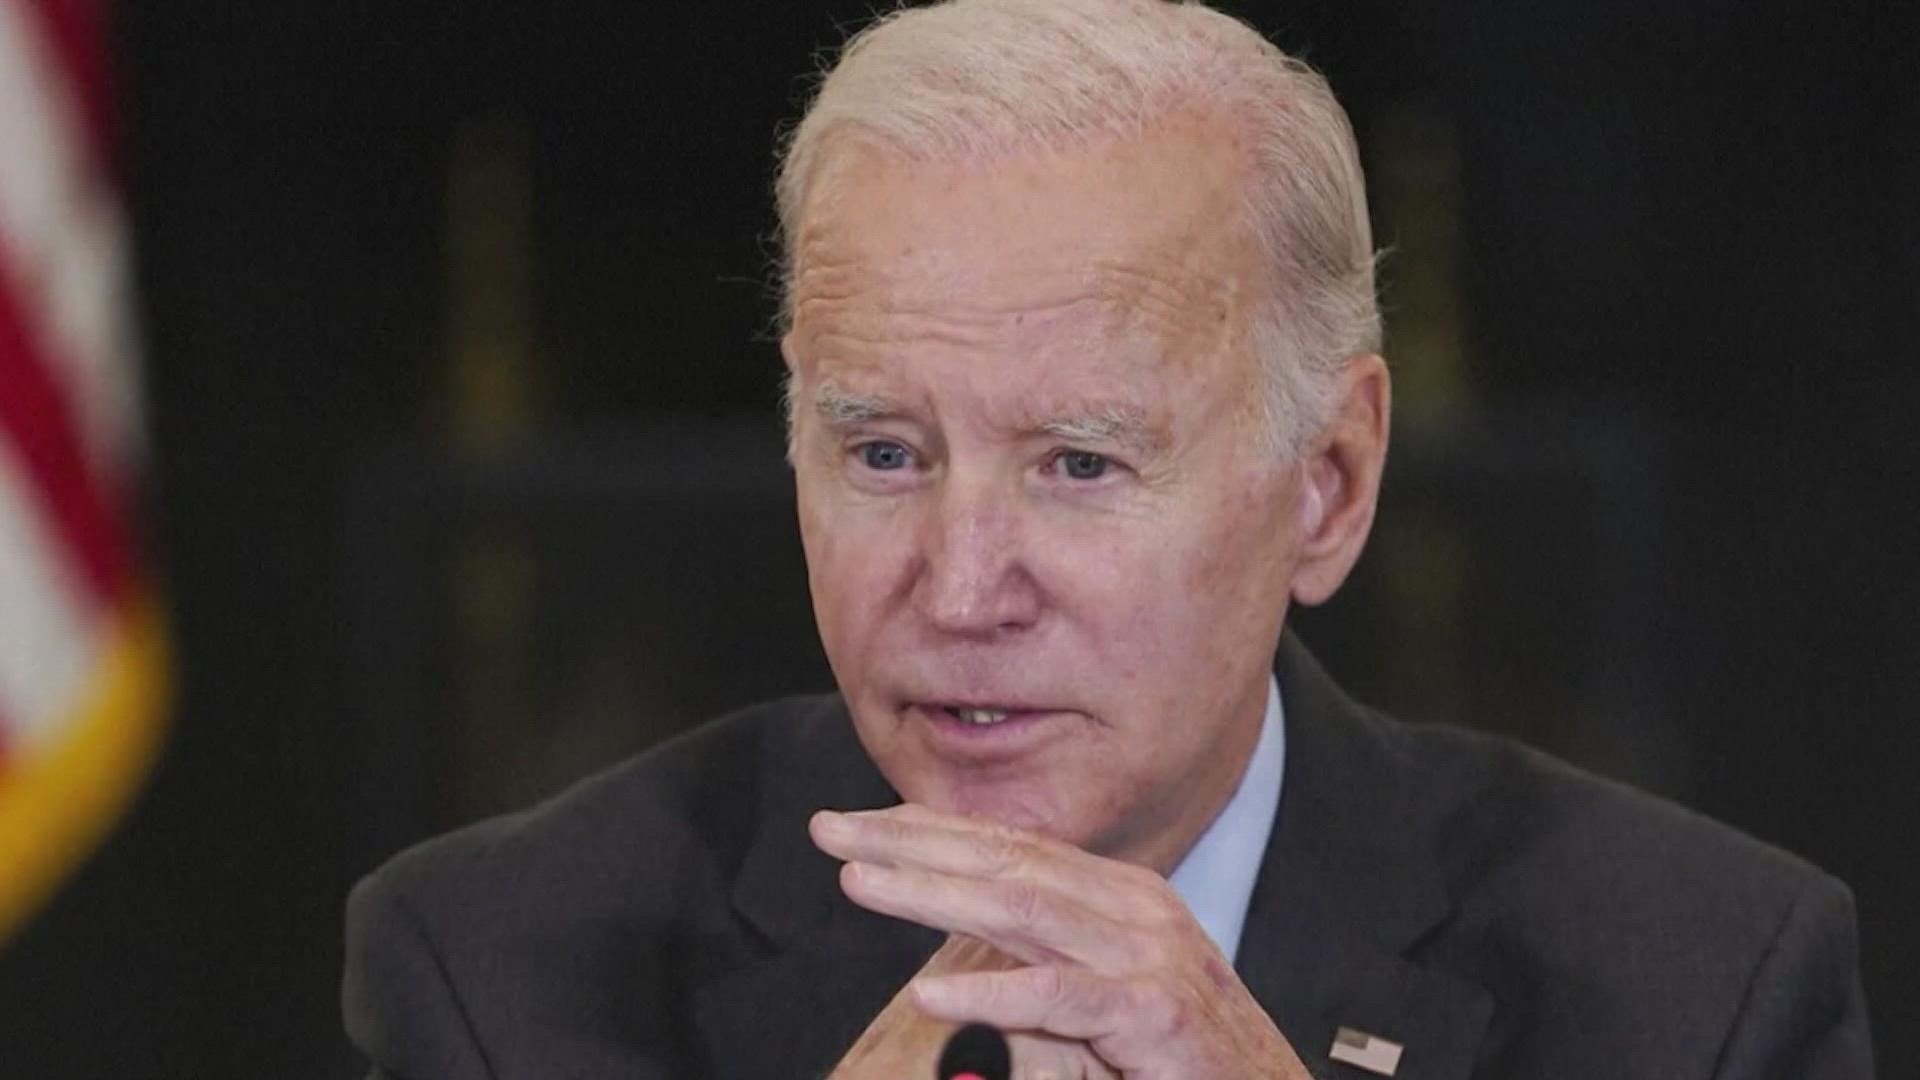 Biden is also calling on governors to issue similar pardons for those convicted of state marijuana offenses.